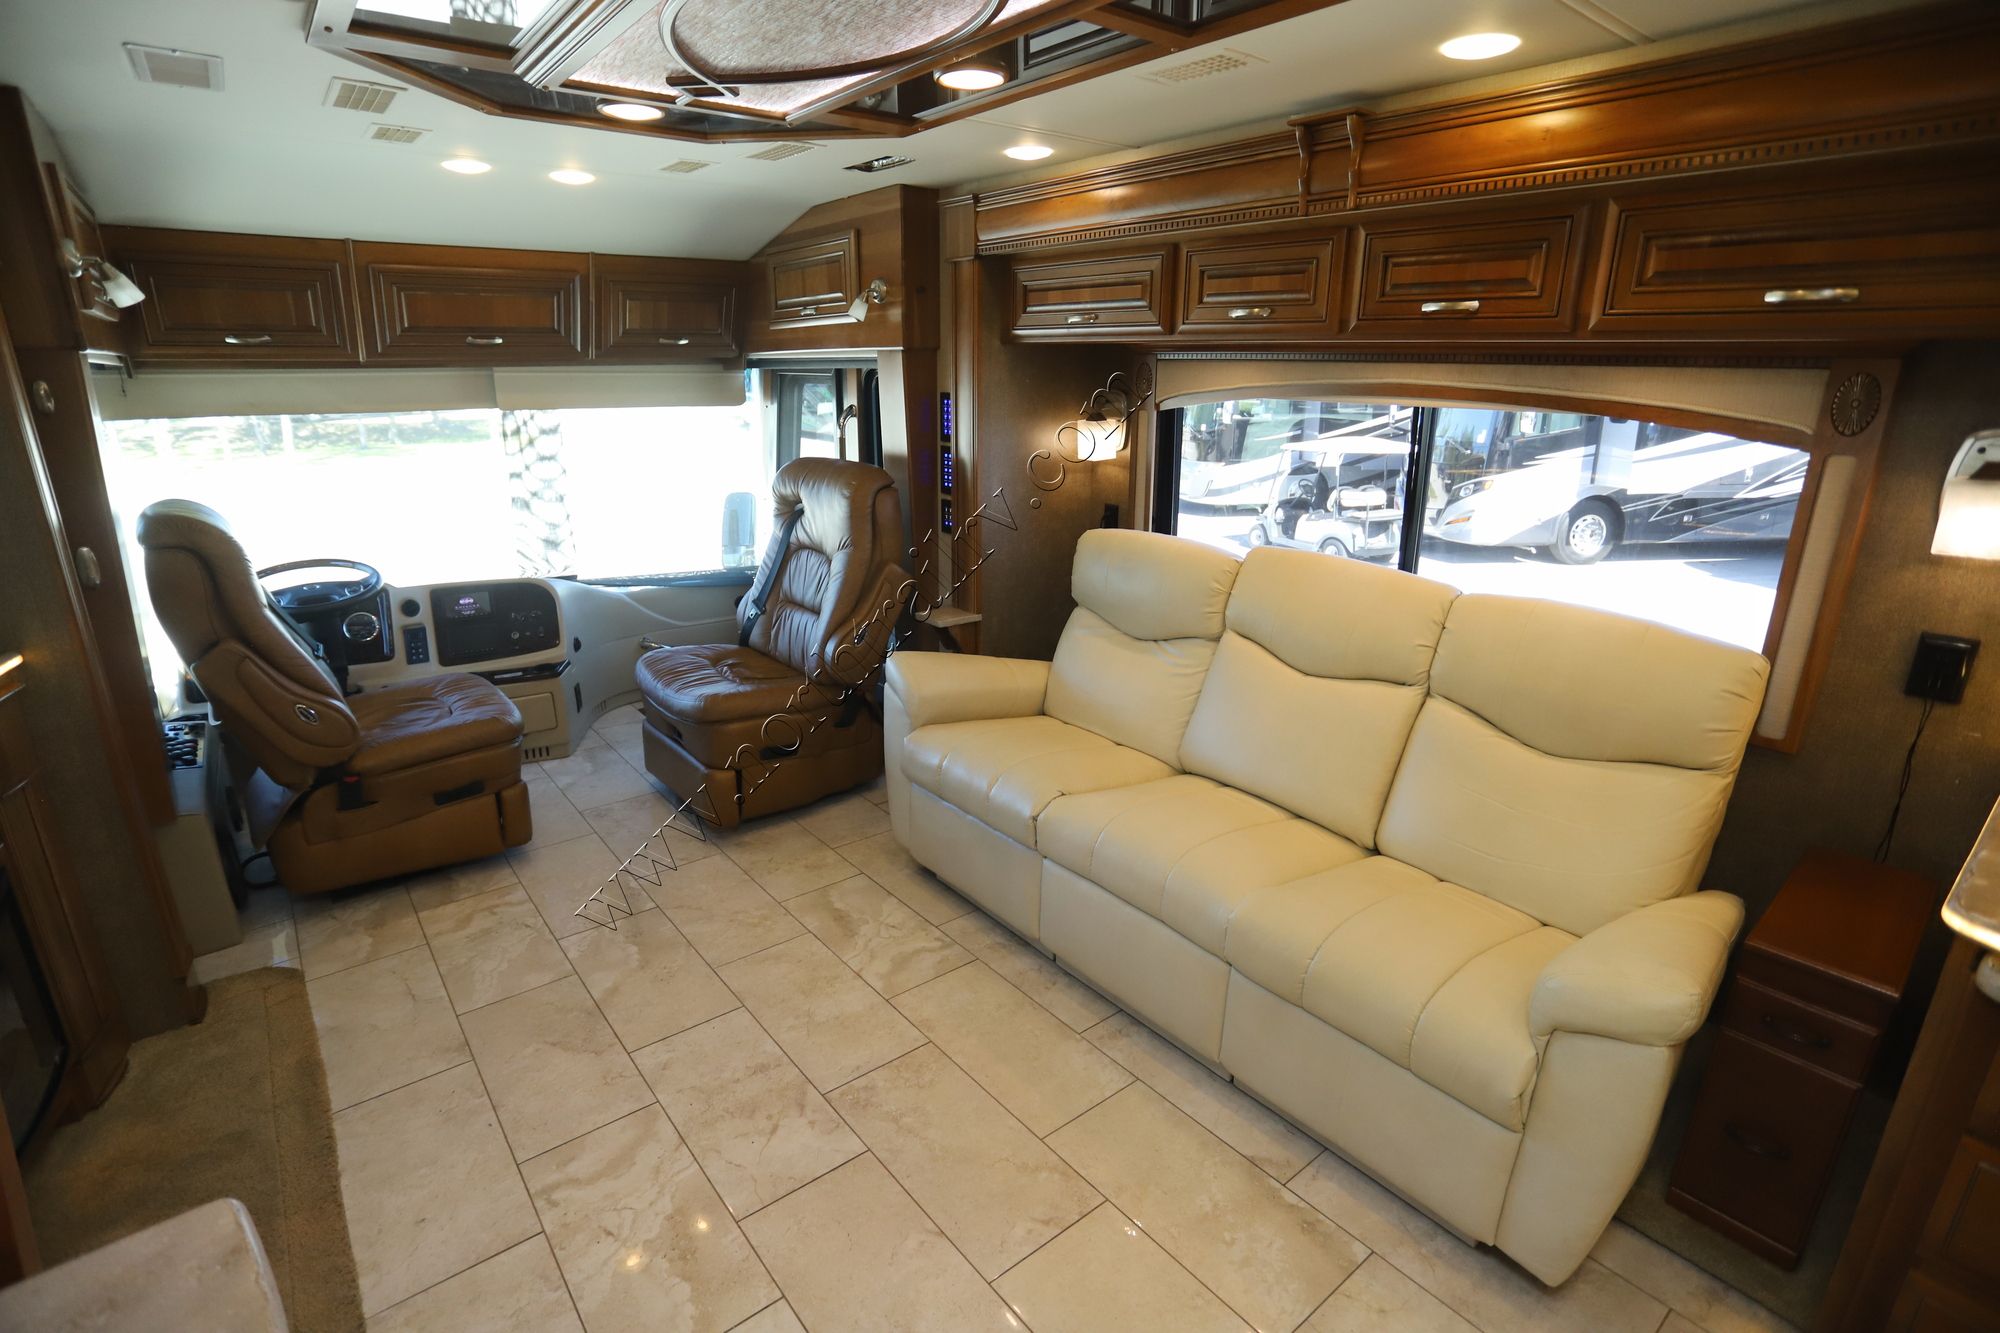 Used 2016 Entegra Anthem 44B Class A  For Sale